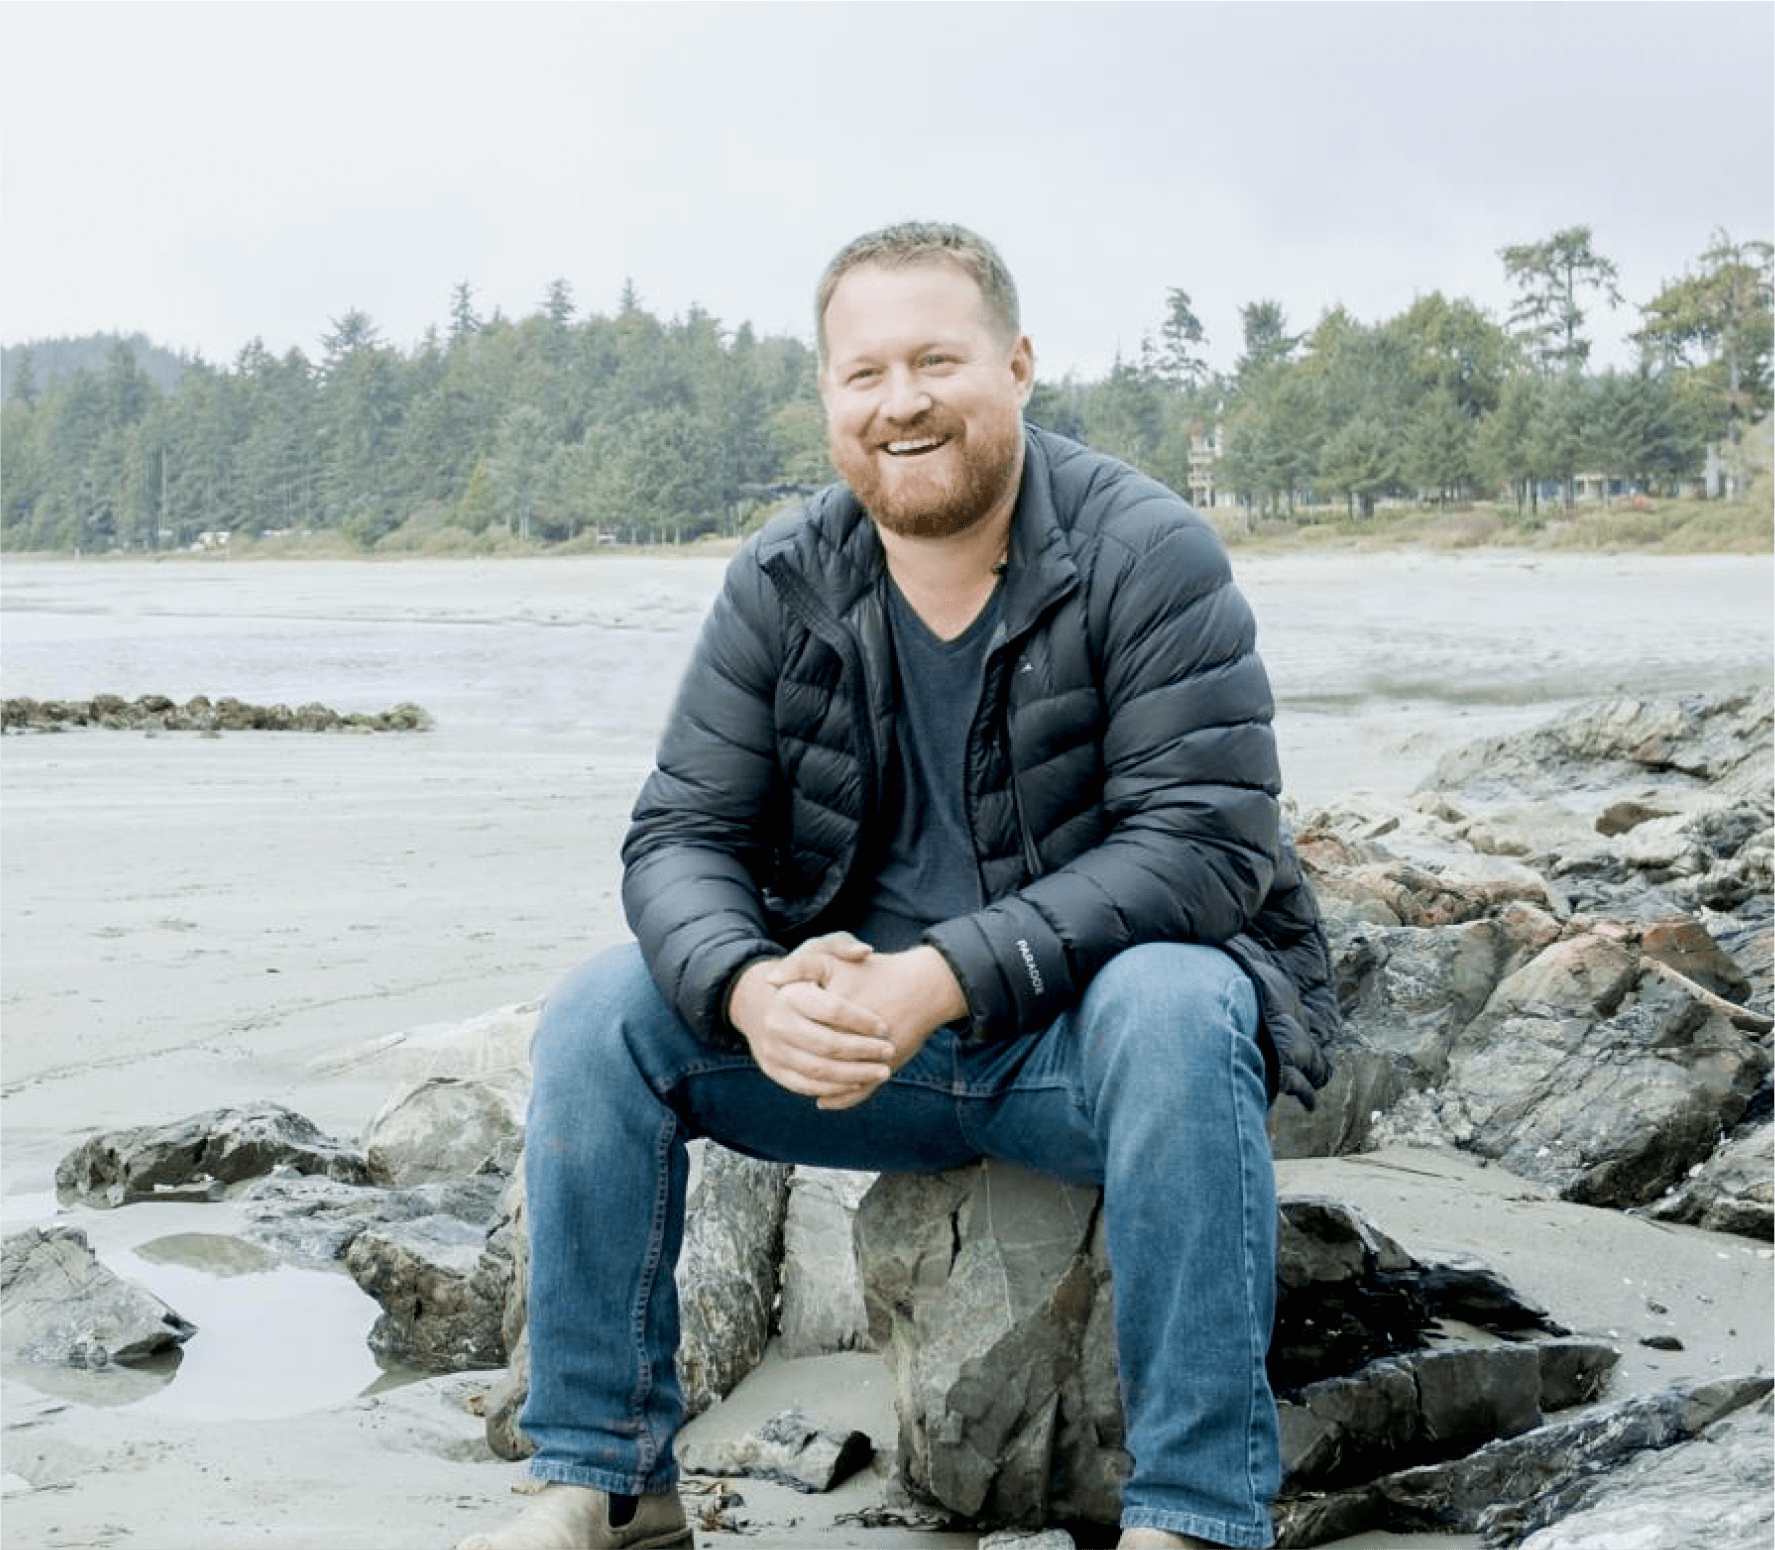 Chad Davis, partner and co-founder of LiveCA, sitting on rocks by the sea.